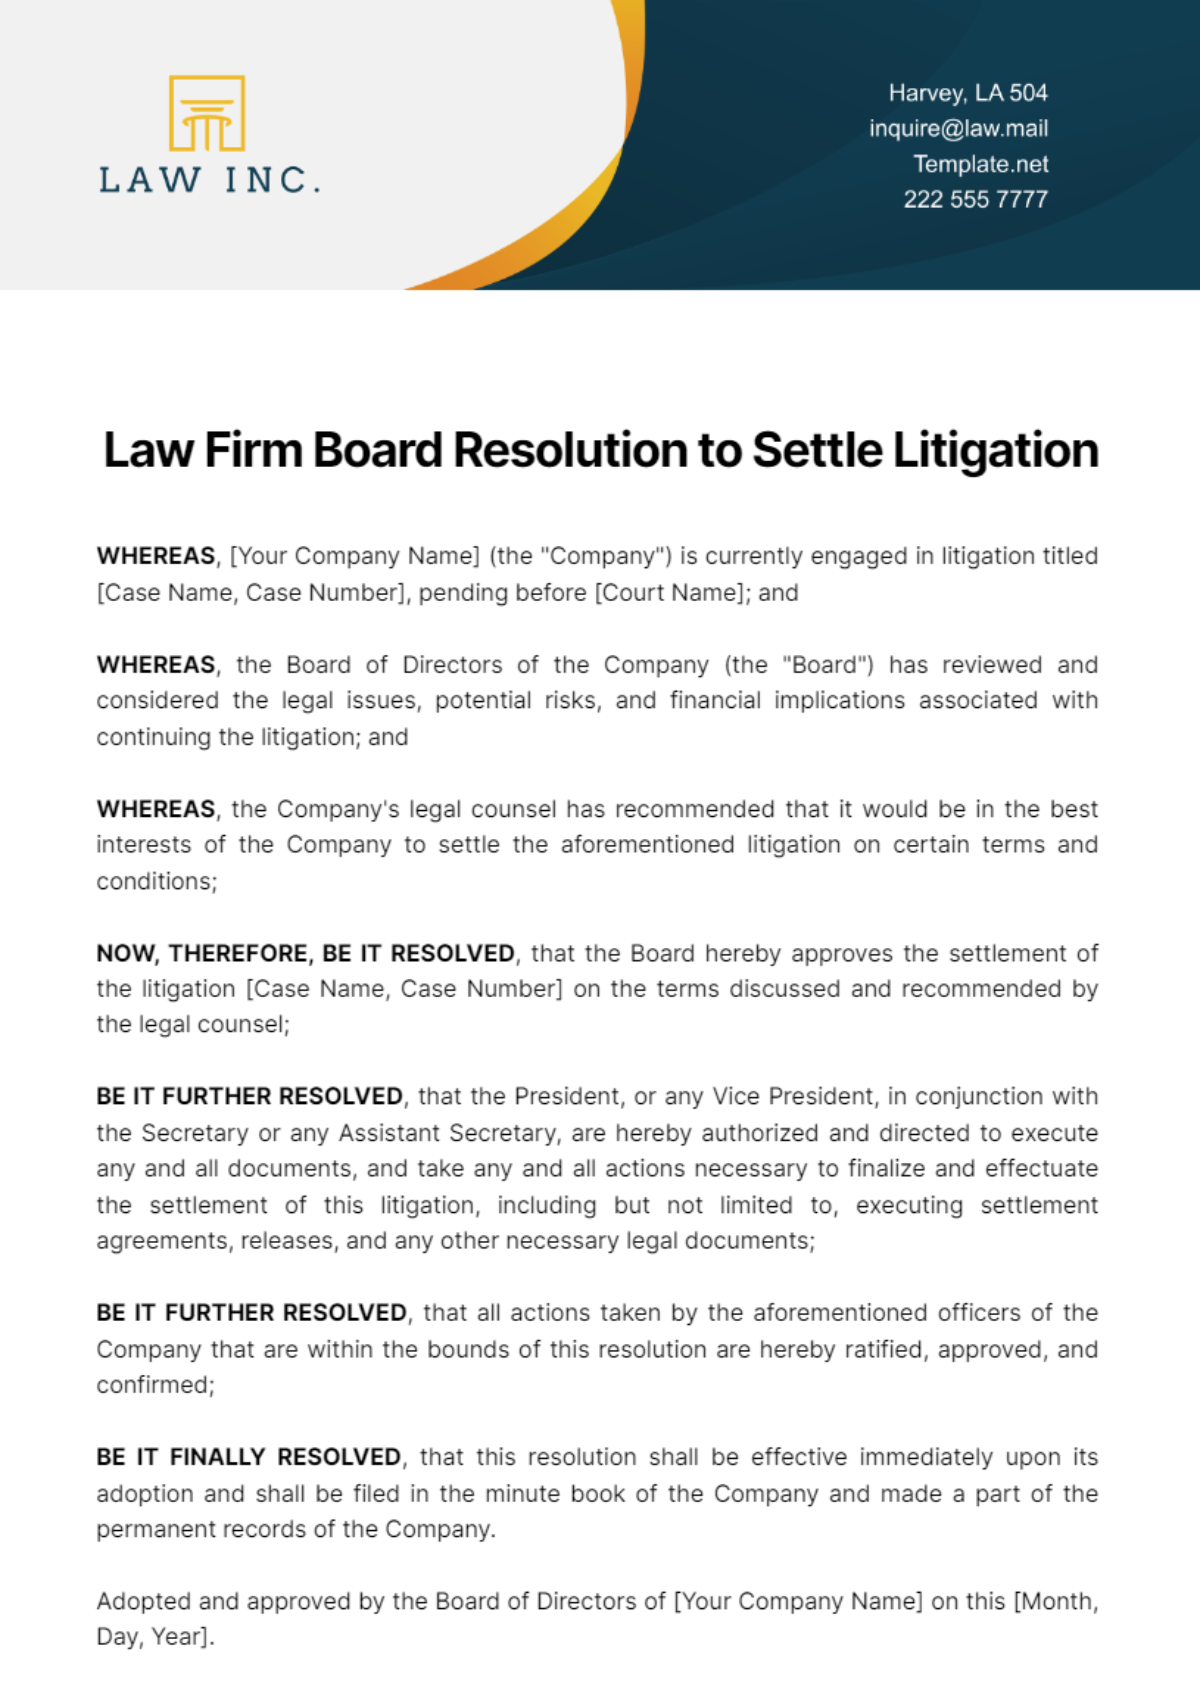 Law Firm Board Resolution to Settle Litigation Template